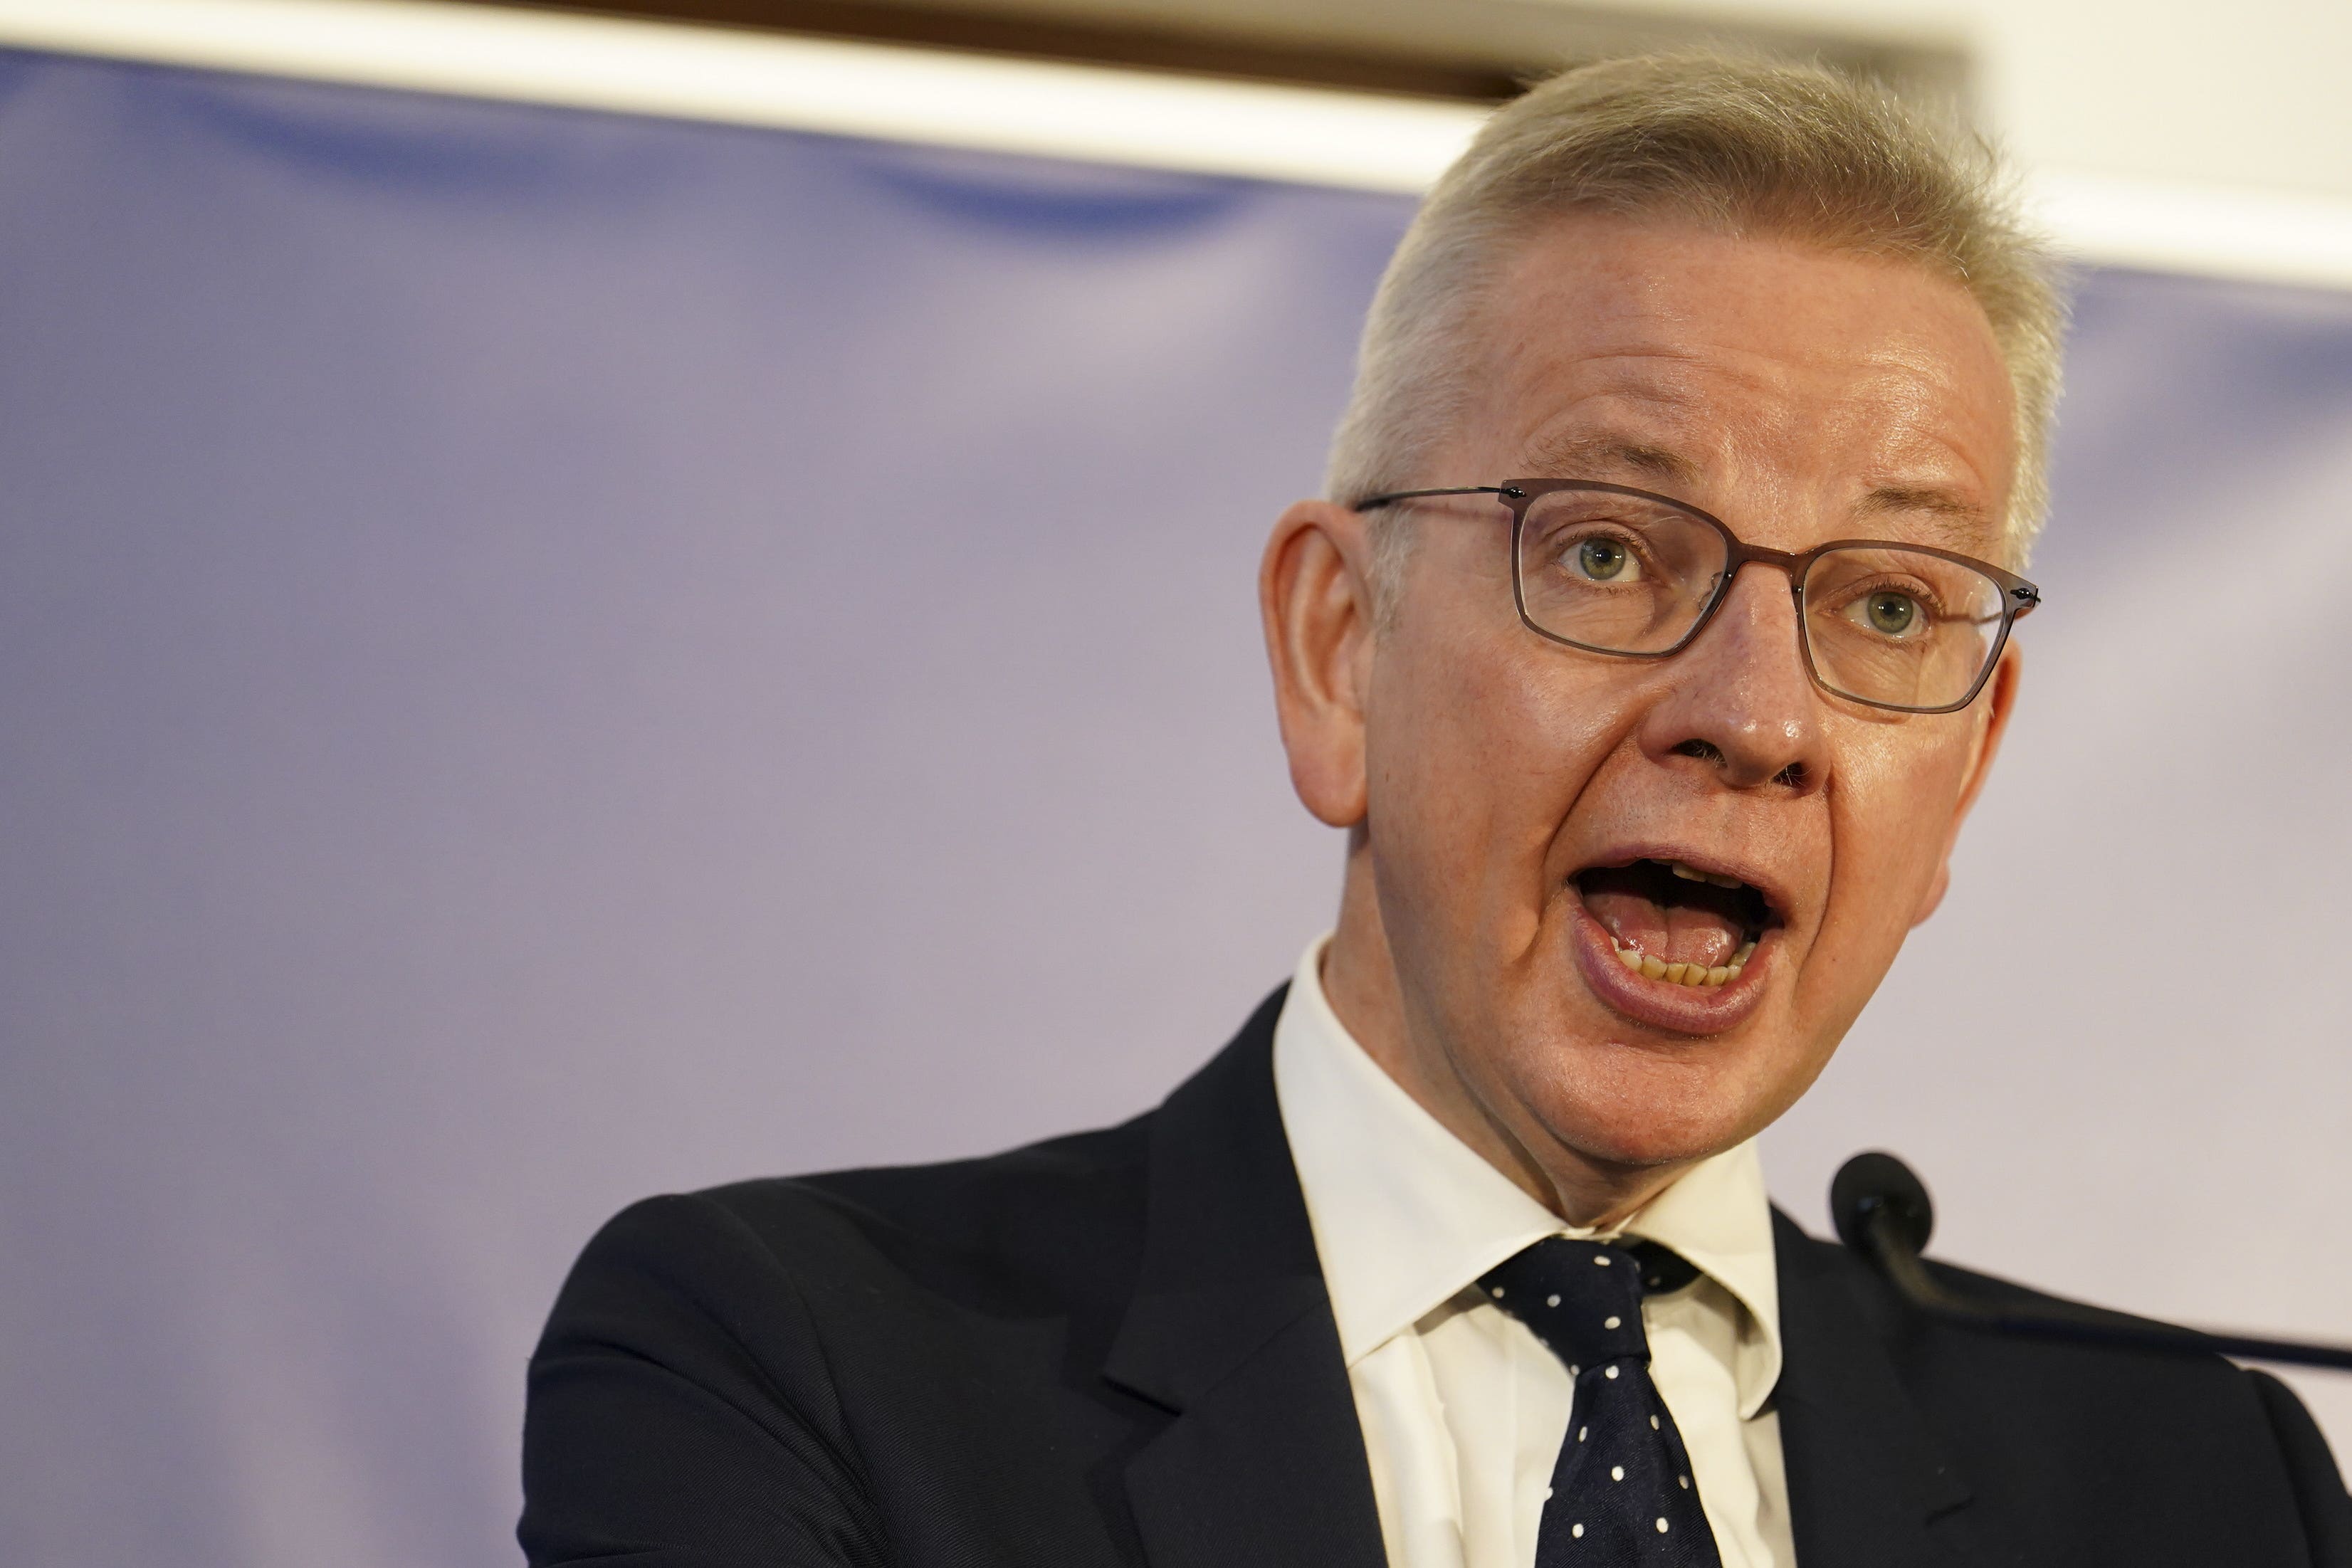 Cabinet minister Michael Gove says council planning departments are taking too long to process new housing applications